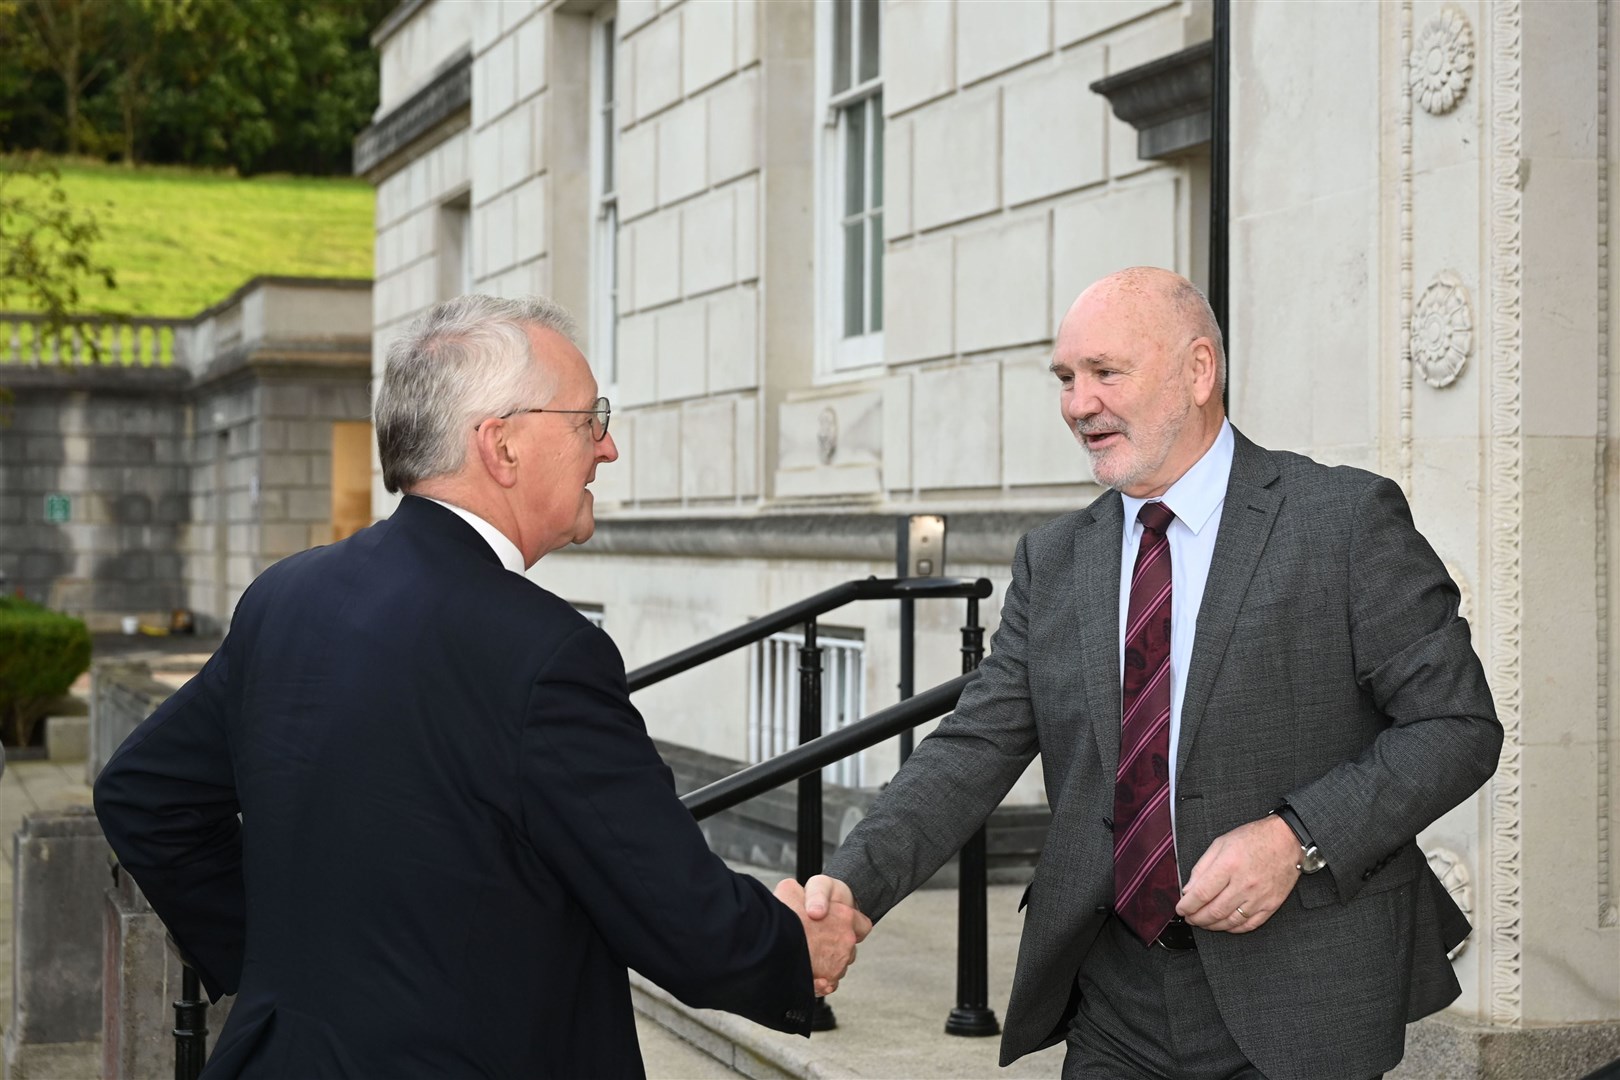 Shadow Northern Ireland secretary Hilary Benn meeting Speaker Alex Massey during his visit to Ulster (NI Assembly)